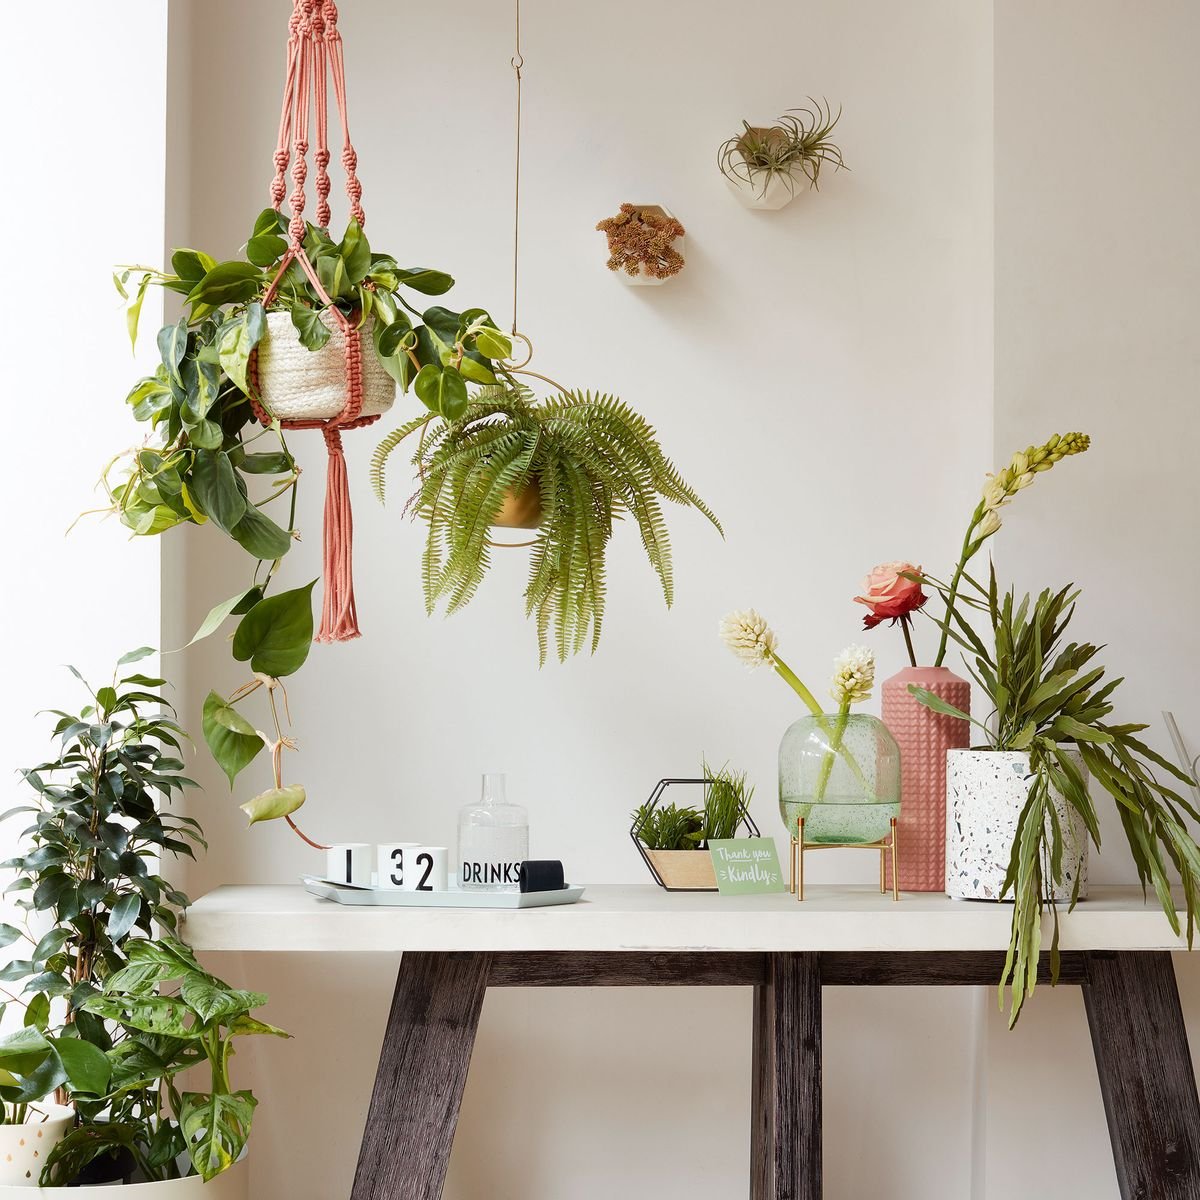 This unusual spot in your kitchen is the ideal place to keep plants warm in winter